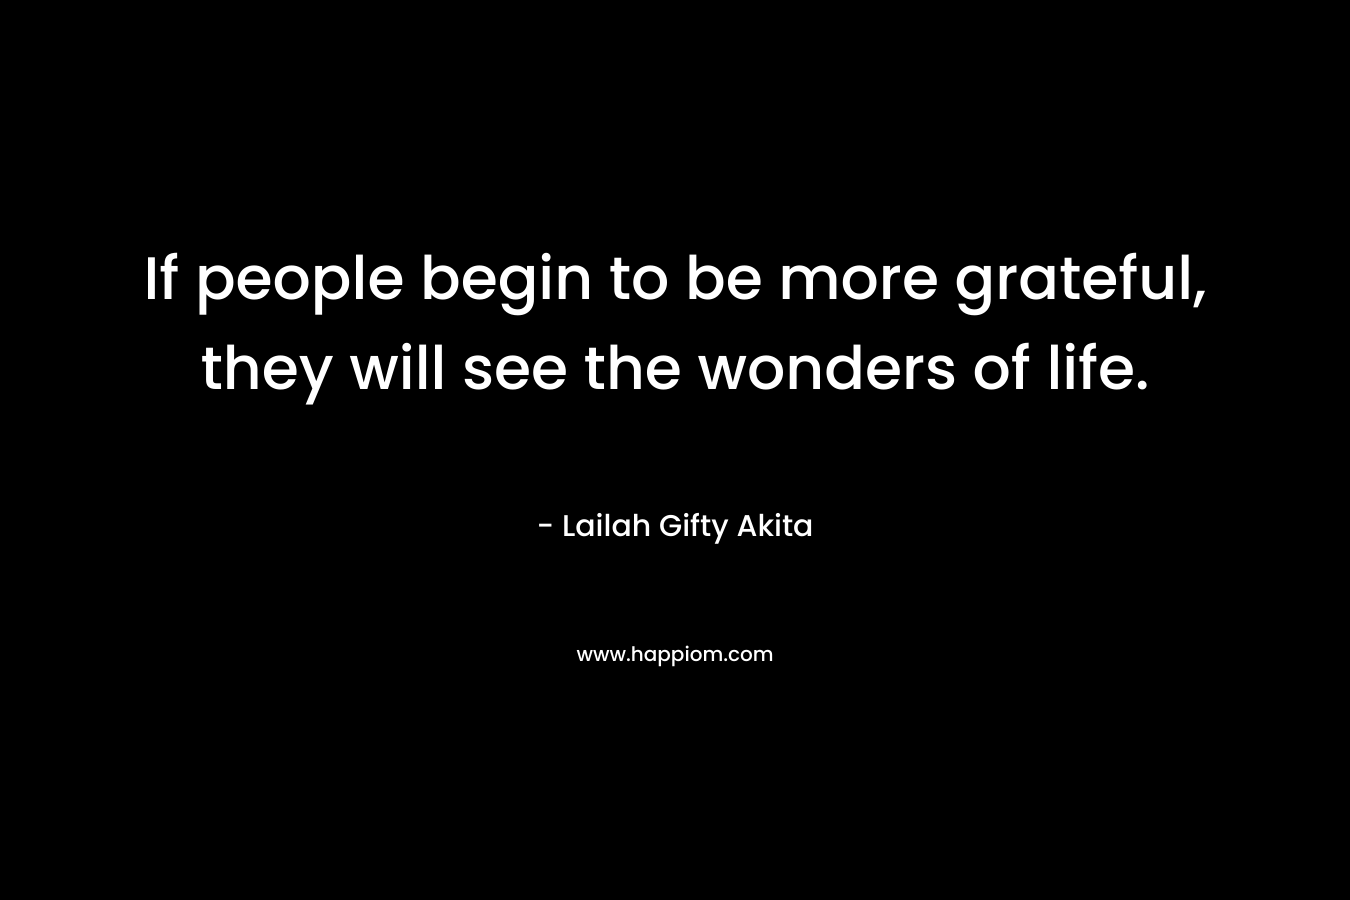 If people begin to be more grateful, they will see the wonders of life.